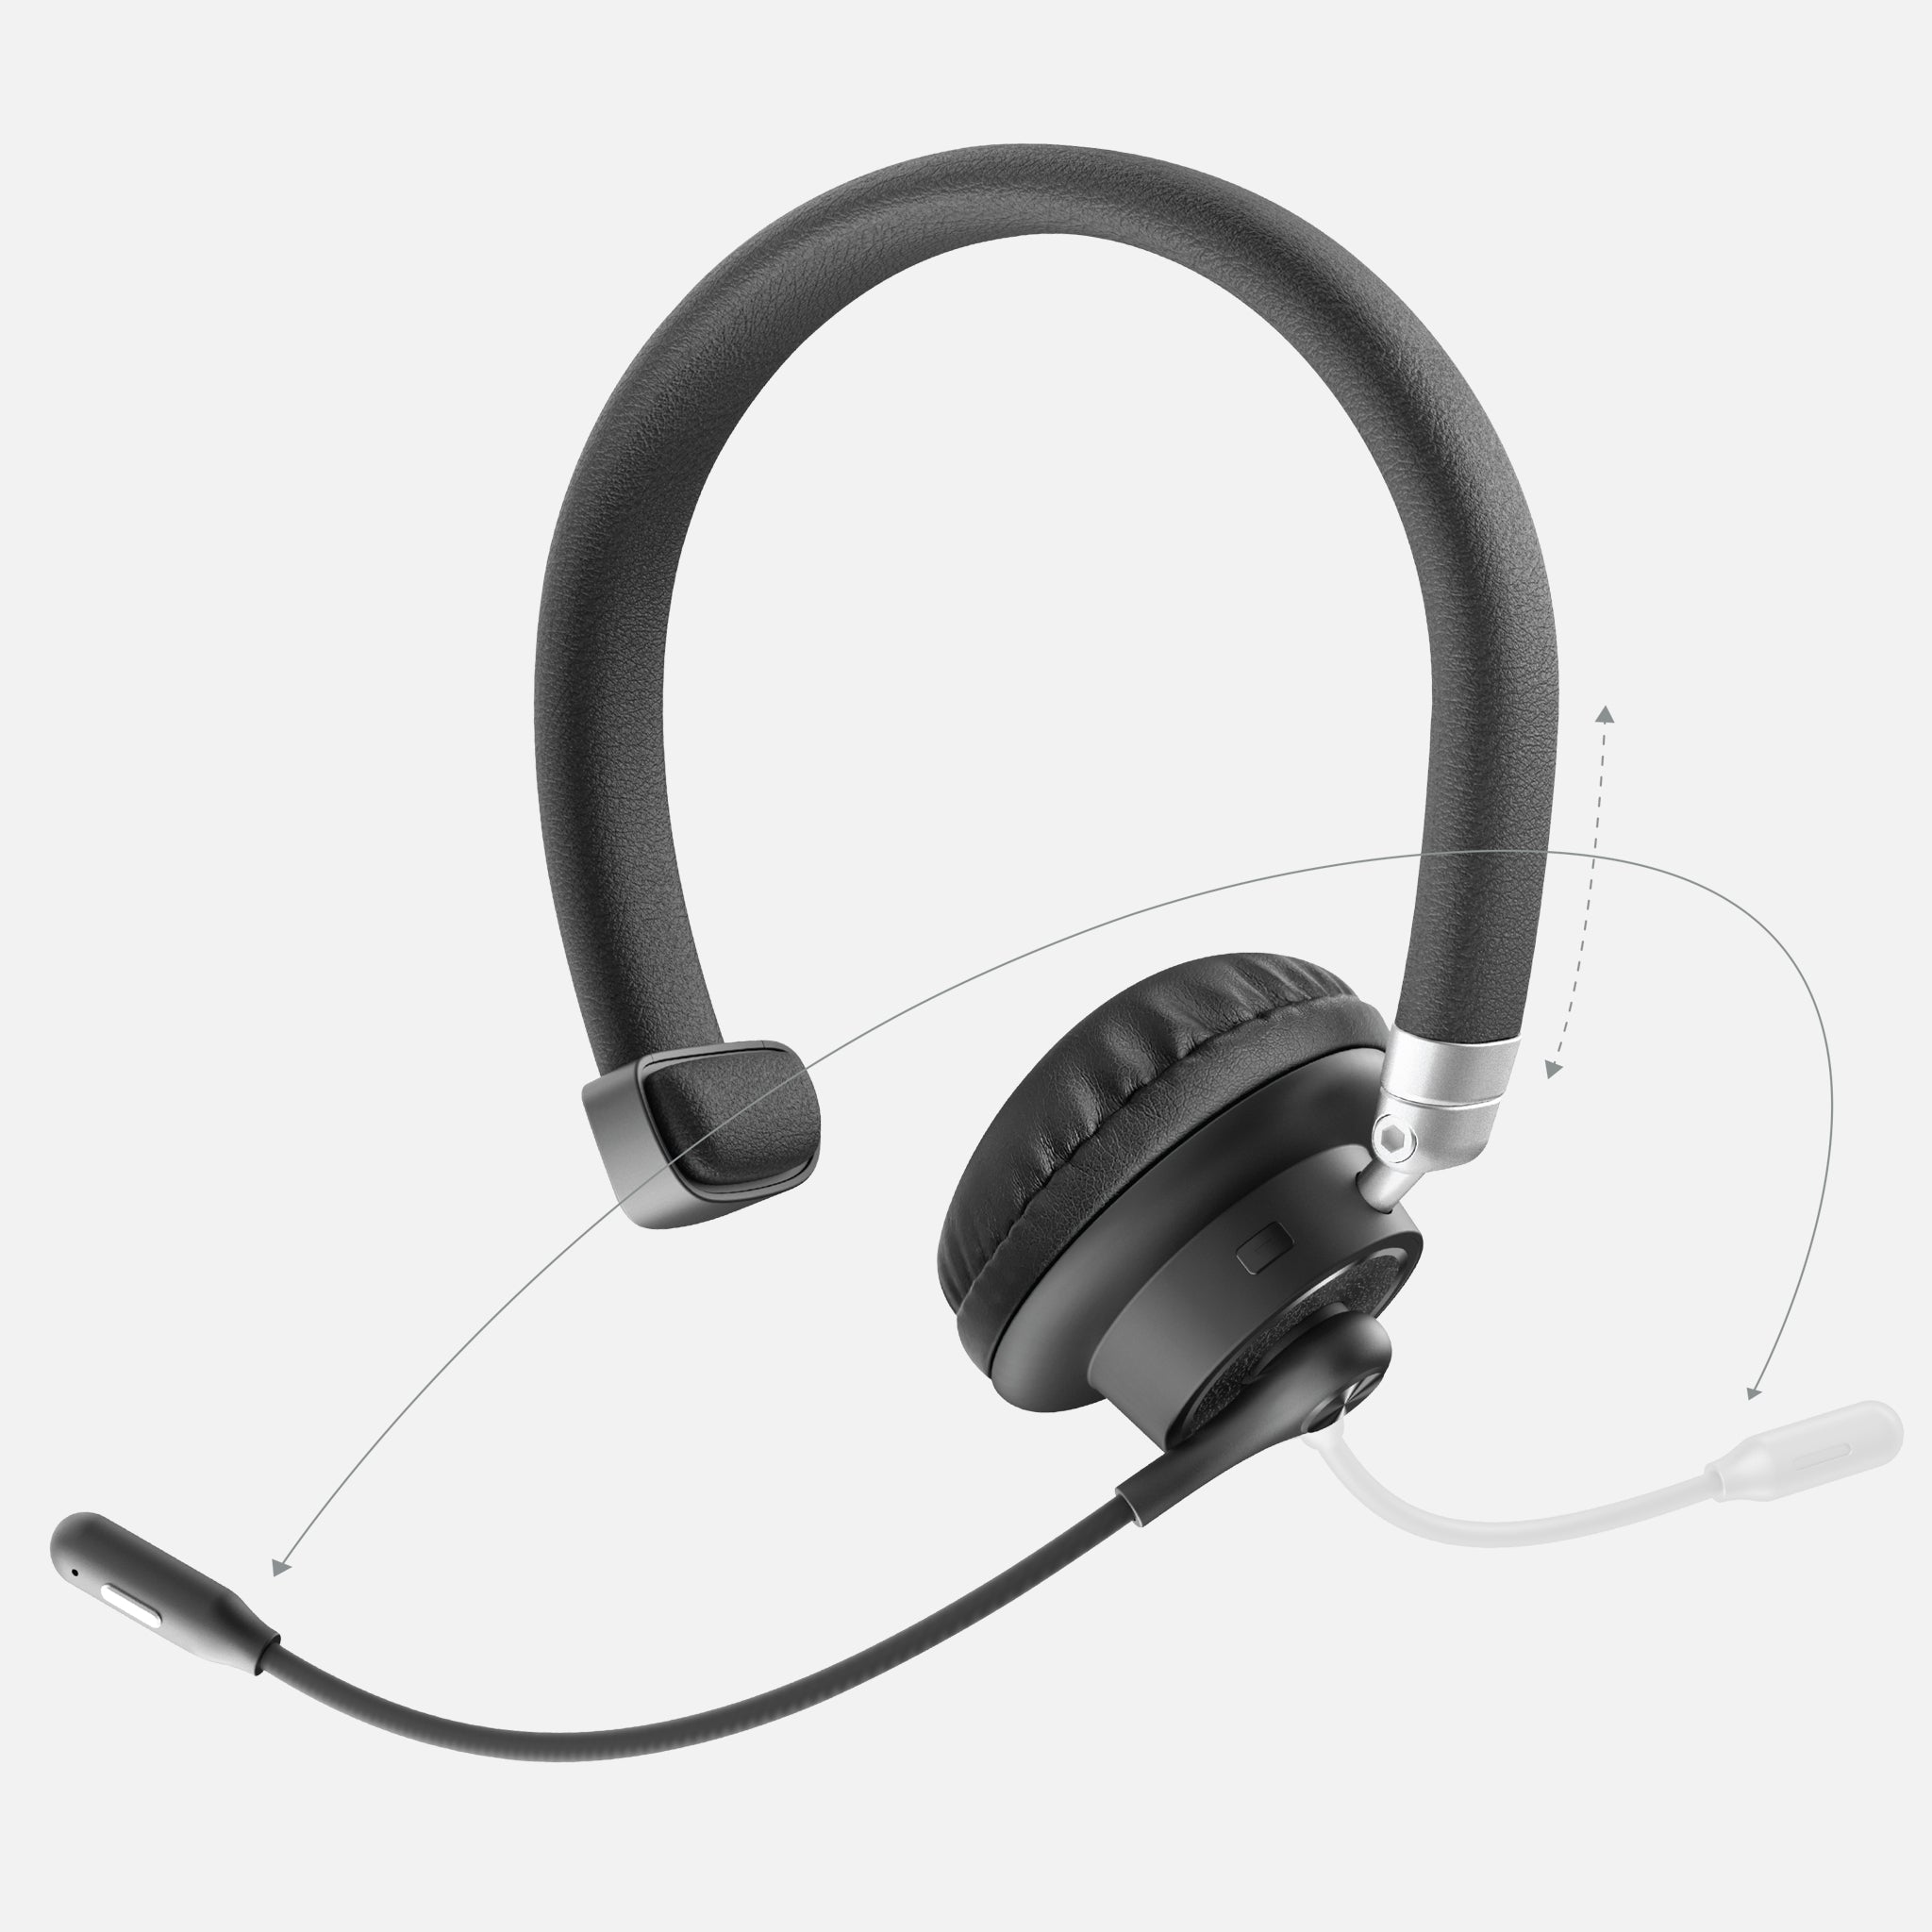 Wireless Headset with Ambient Noise-Canceling Mic - CAR AND DRIVER BT4500BK